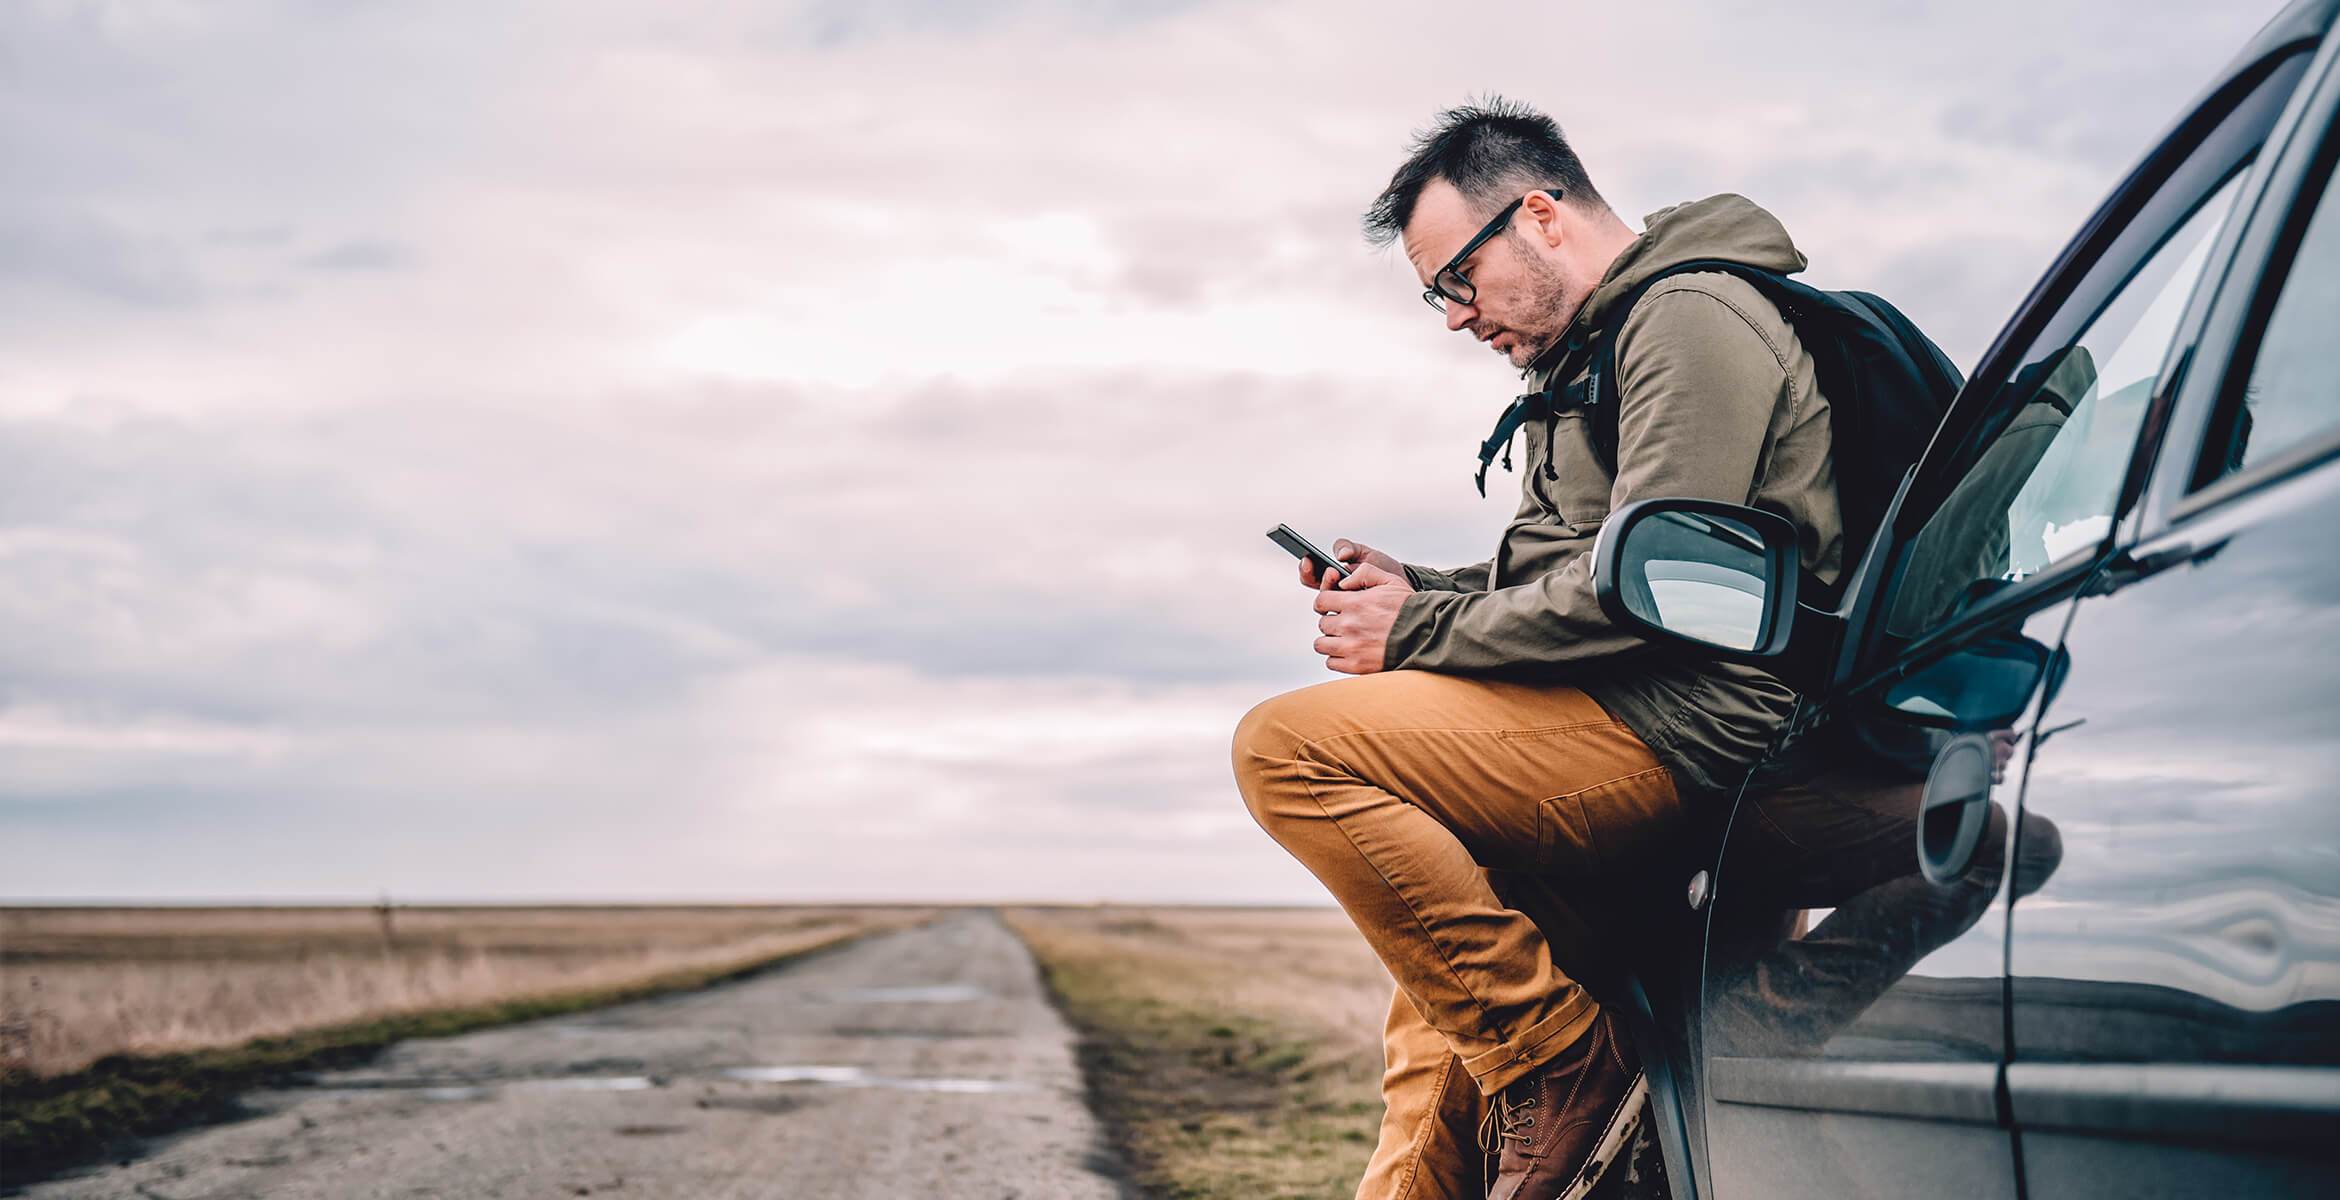 Man sitting on a car looking at phone